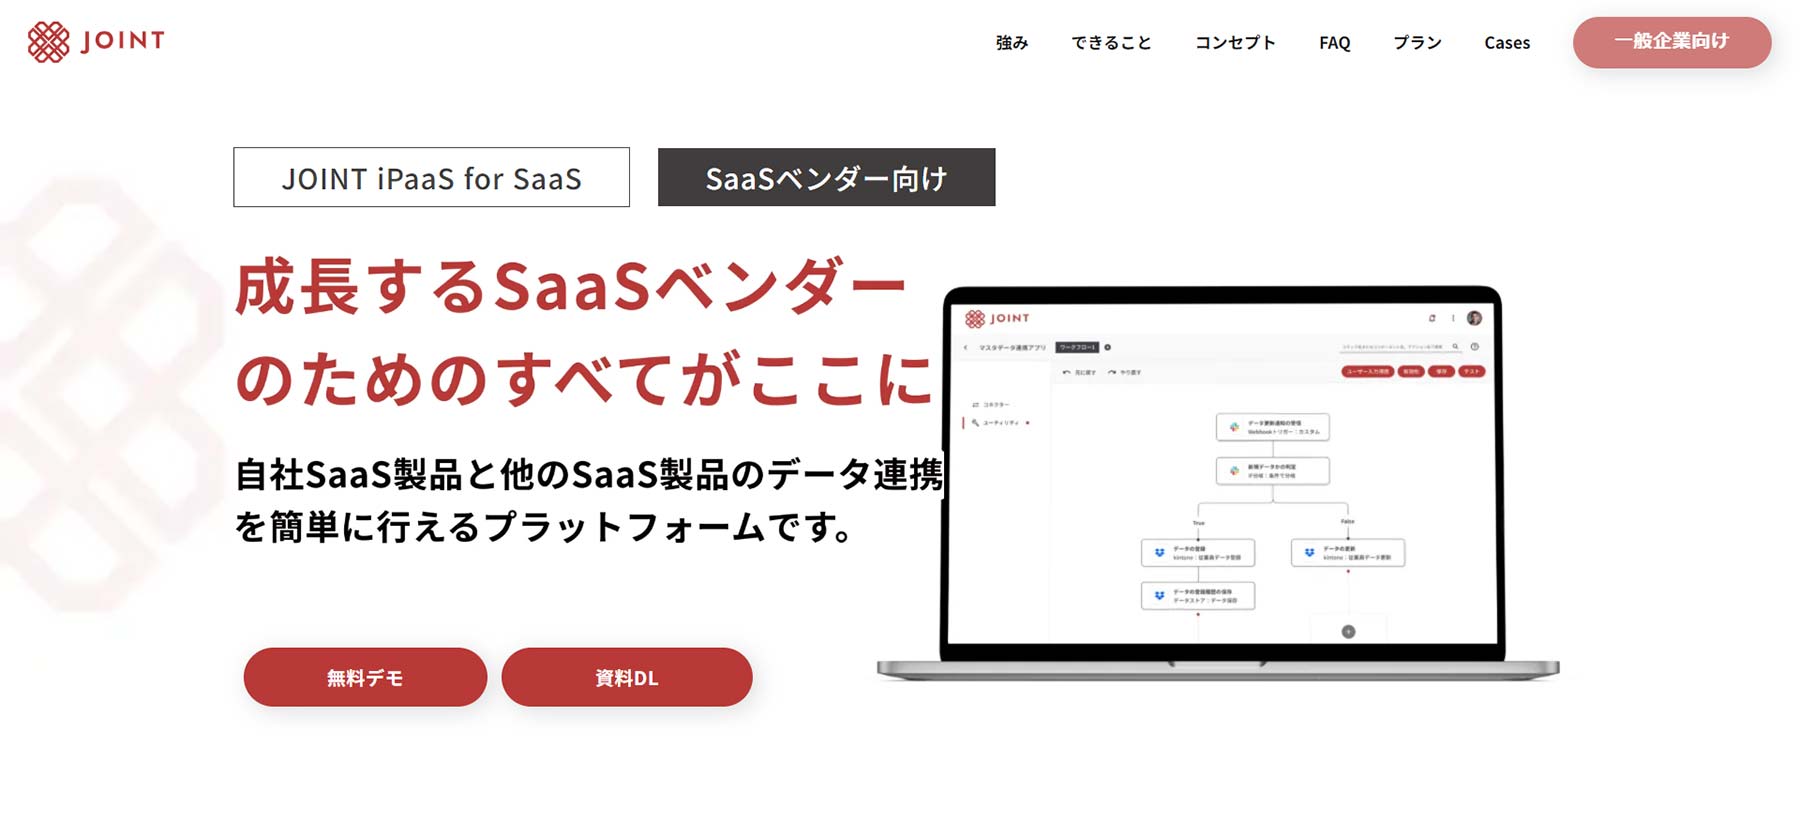 JOINT iPaaS for SaaS公式Webサイト